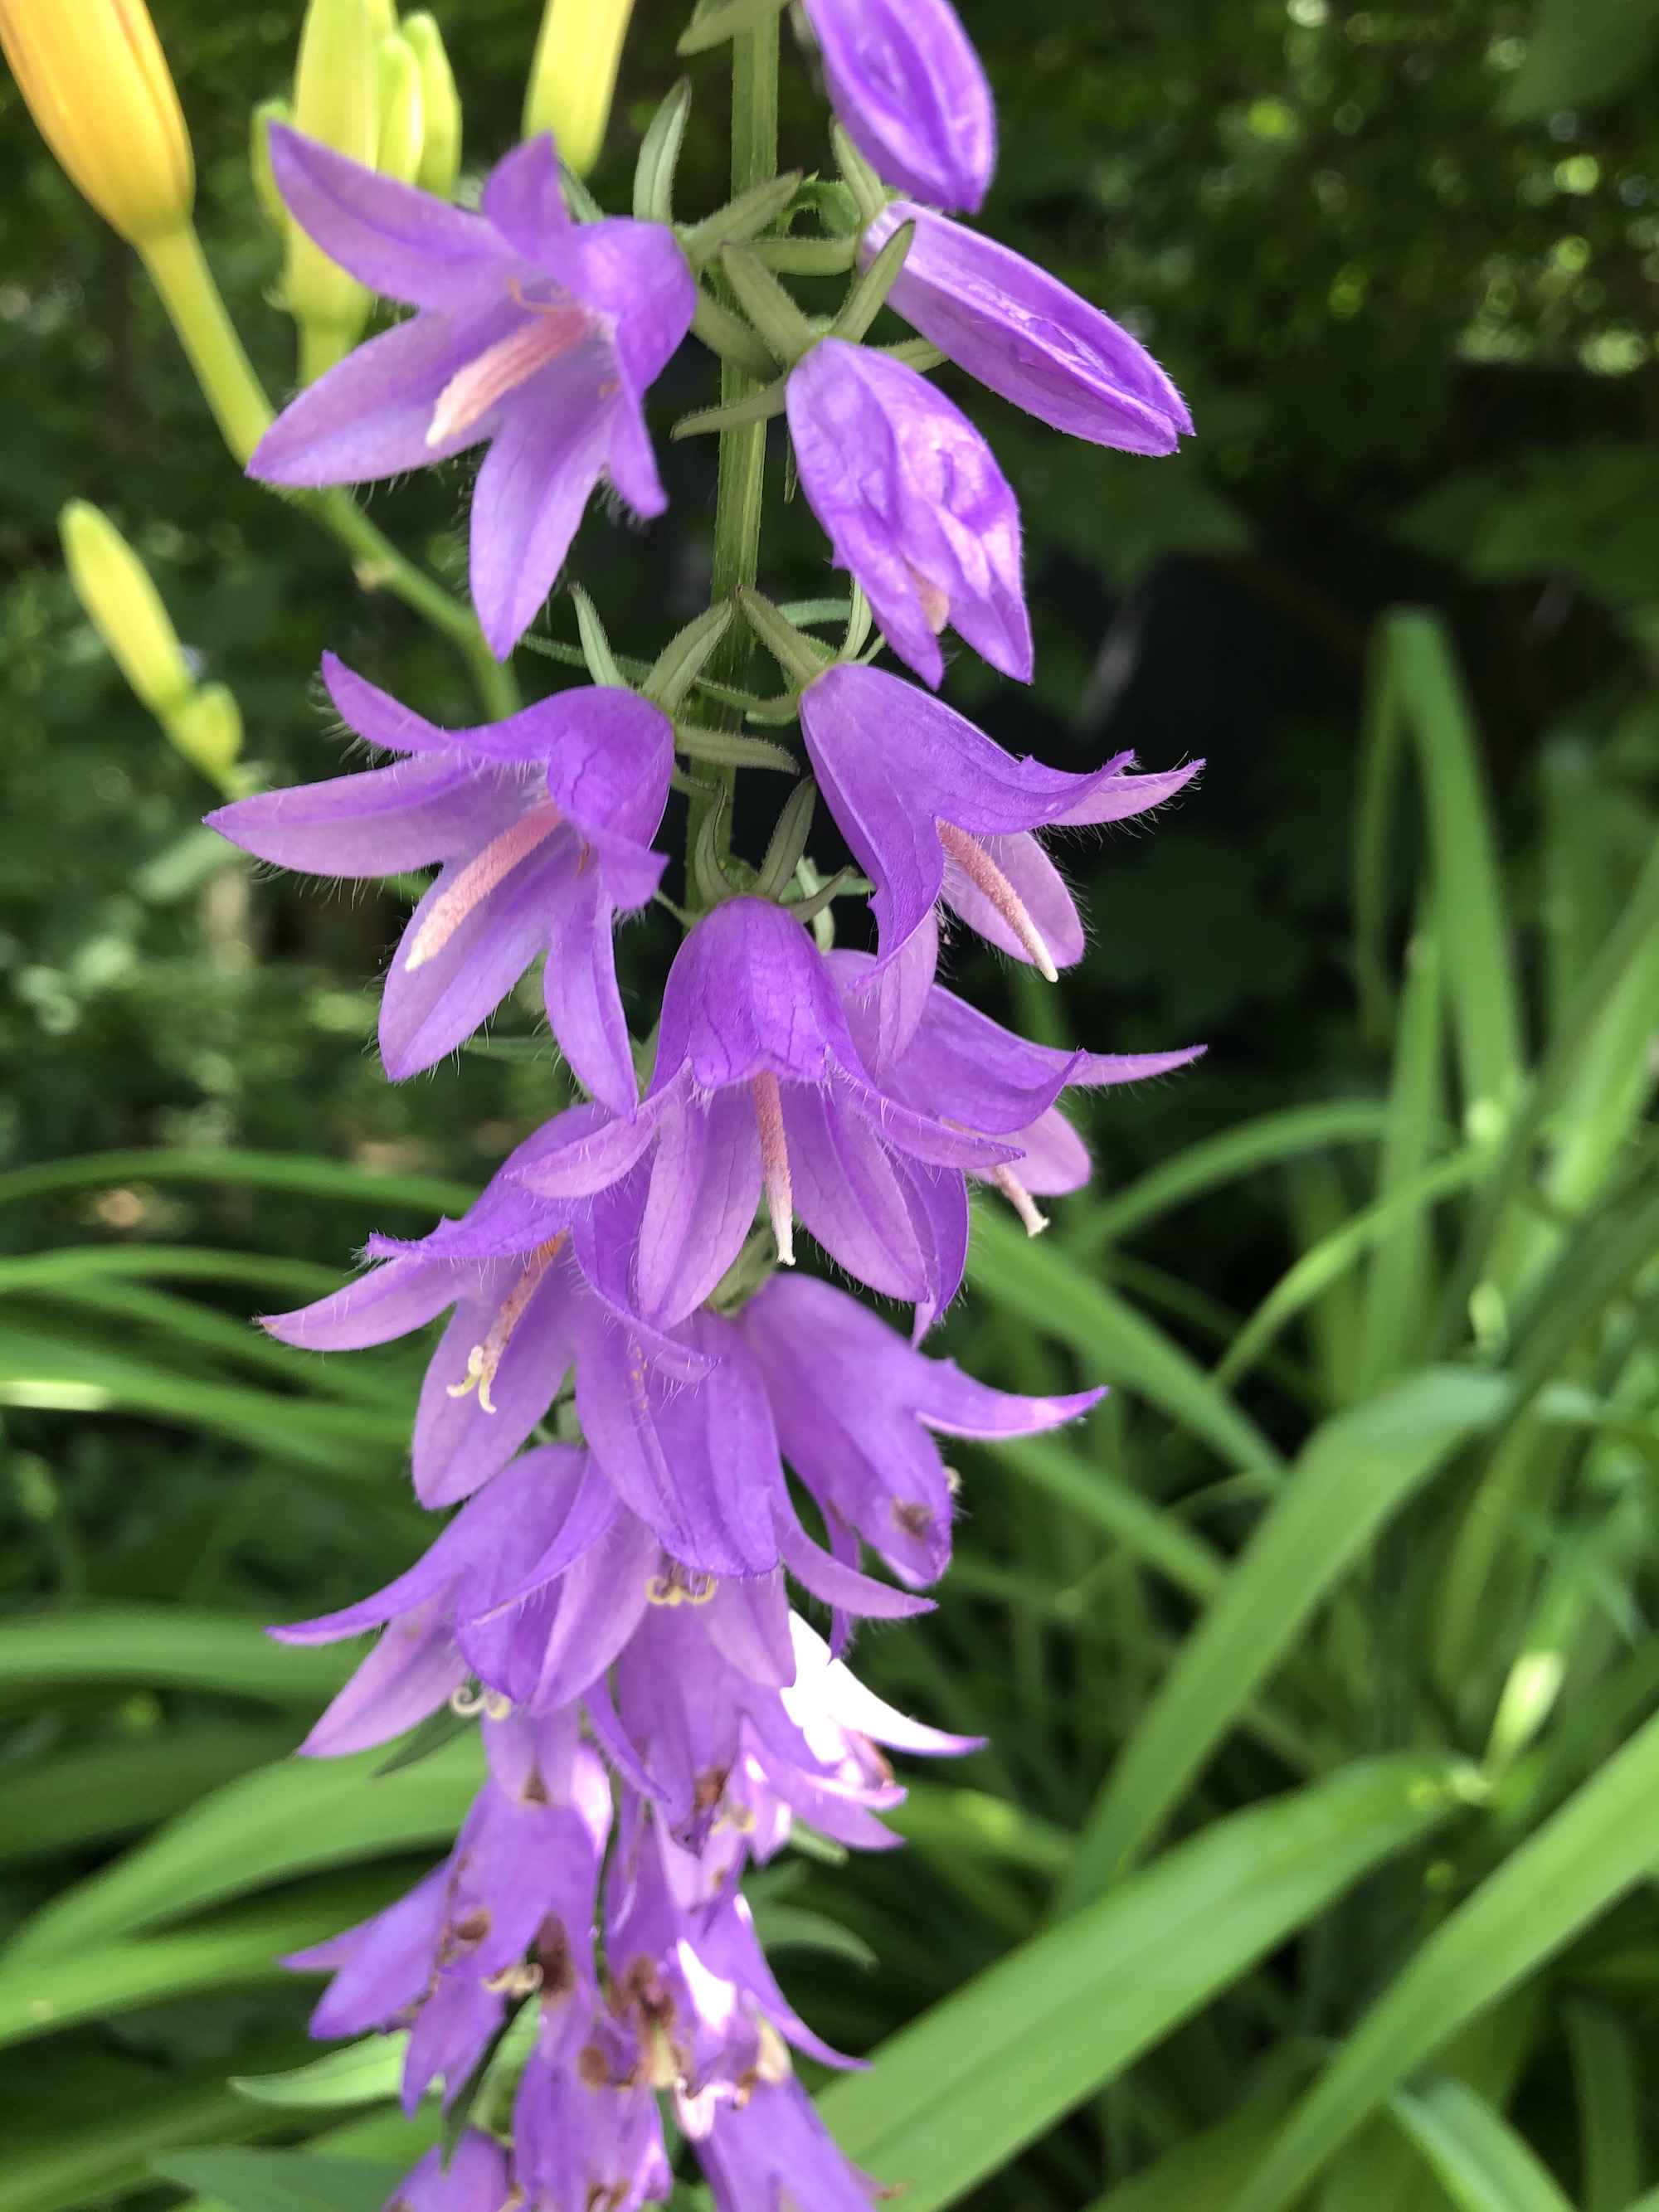 Creeping Bellflower by home in Madison, Wisconsin on June 30, 2020.